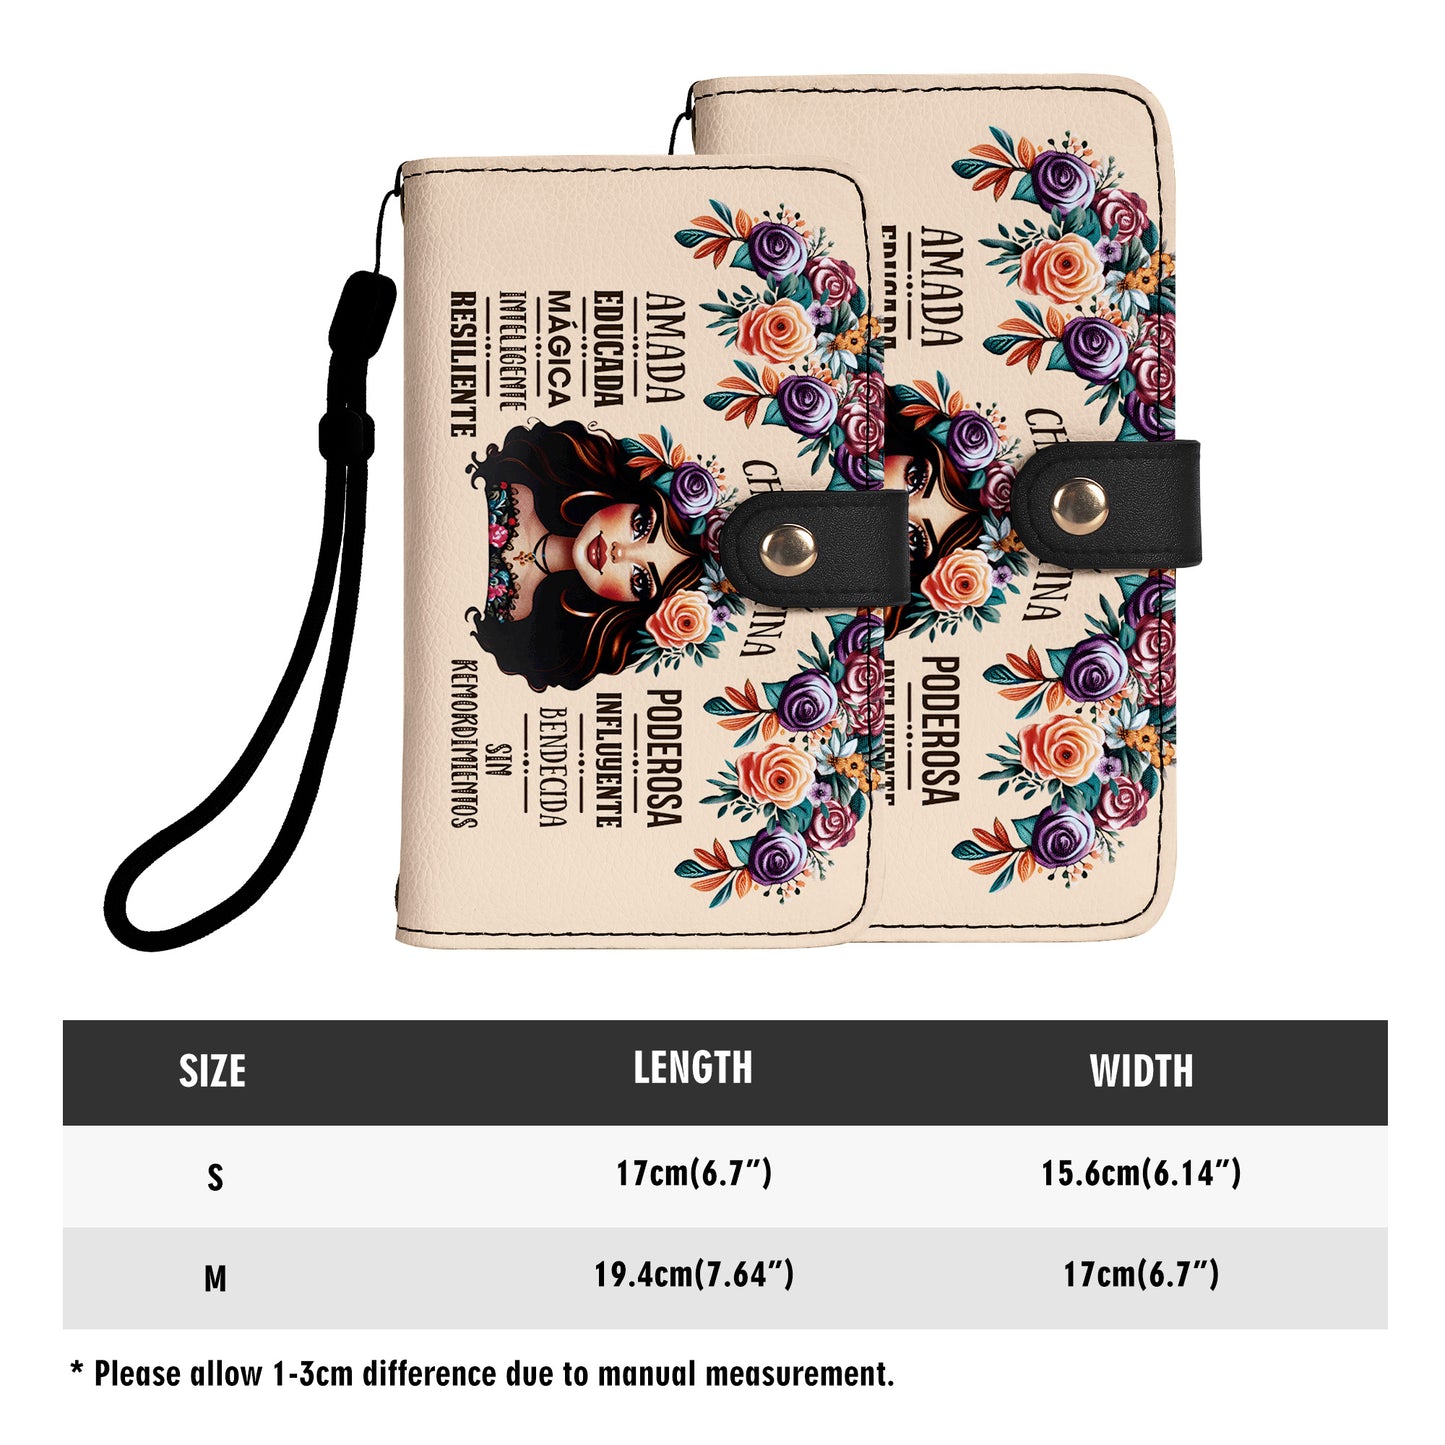 Soy Una Chica Latina - Bespoke Phone Leather Wallet - HG02PW